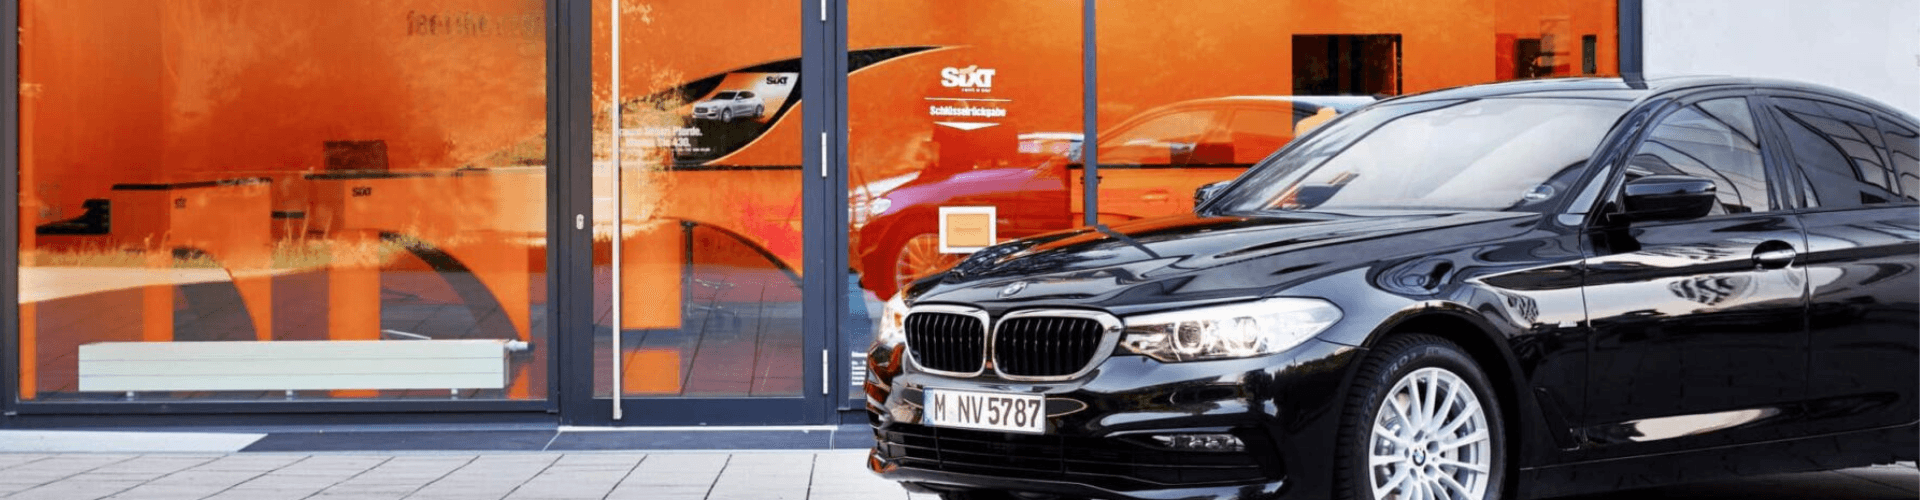 Sixt GmbH cover